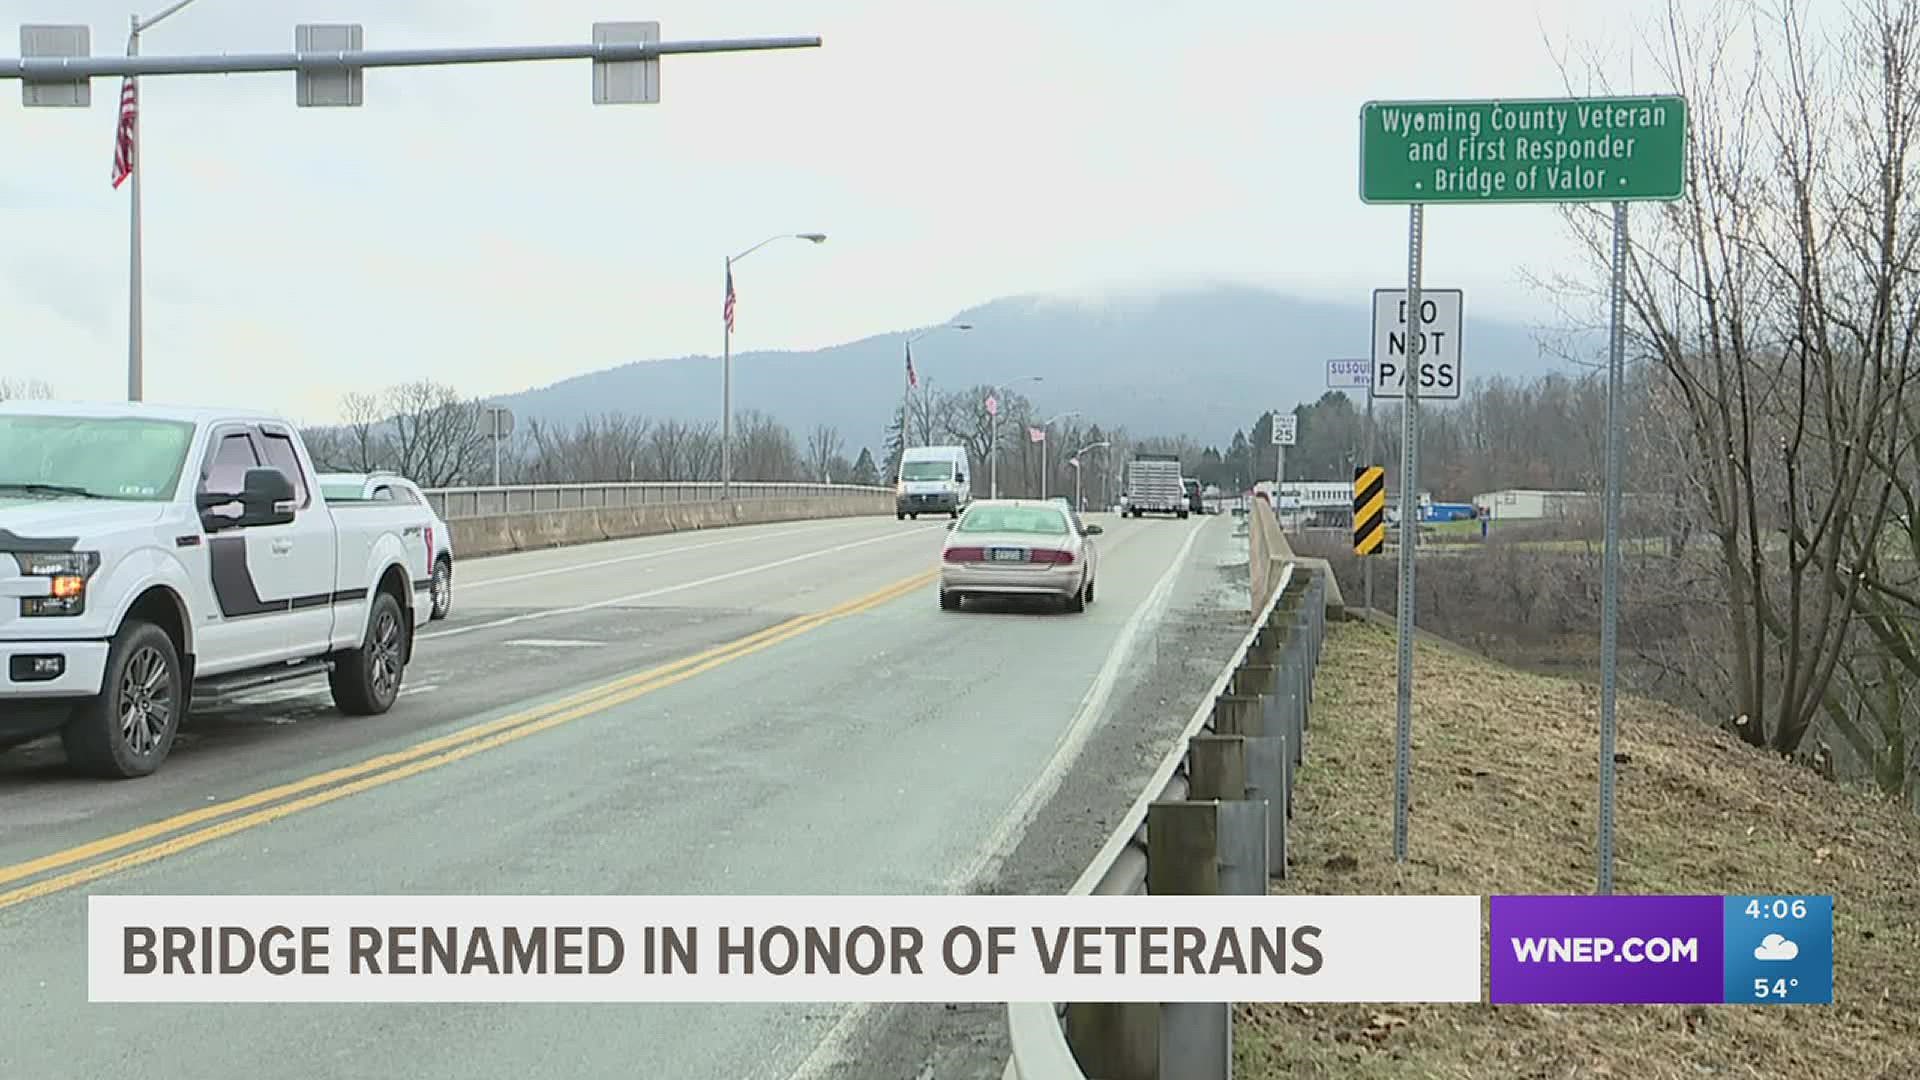 Organizers decided to unveil the new bridge name on the Pearl Harbor anniversary to honor all of the veterans and first responders who serve Wyoming County.